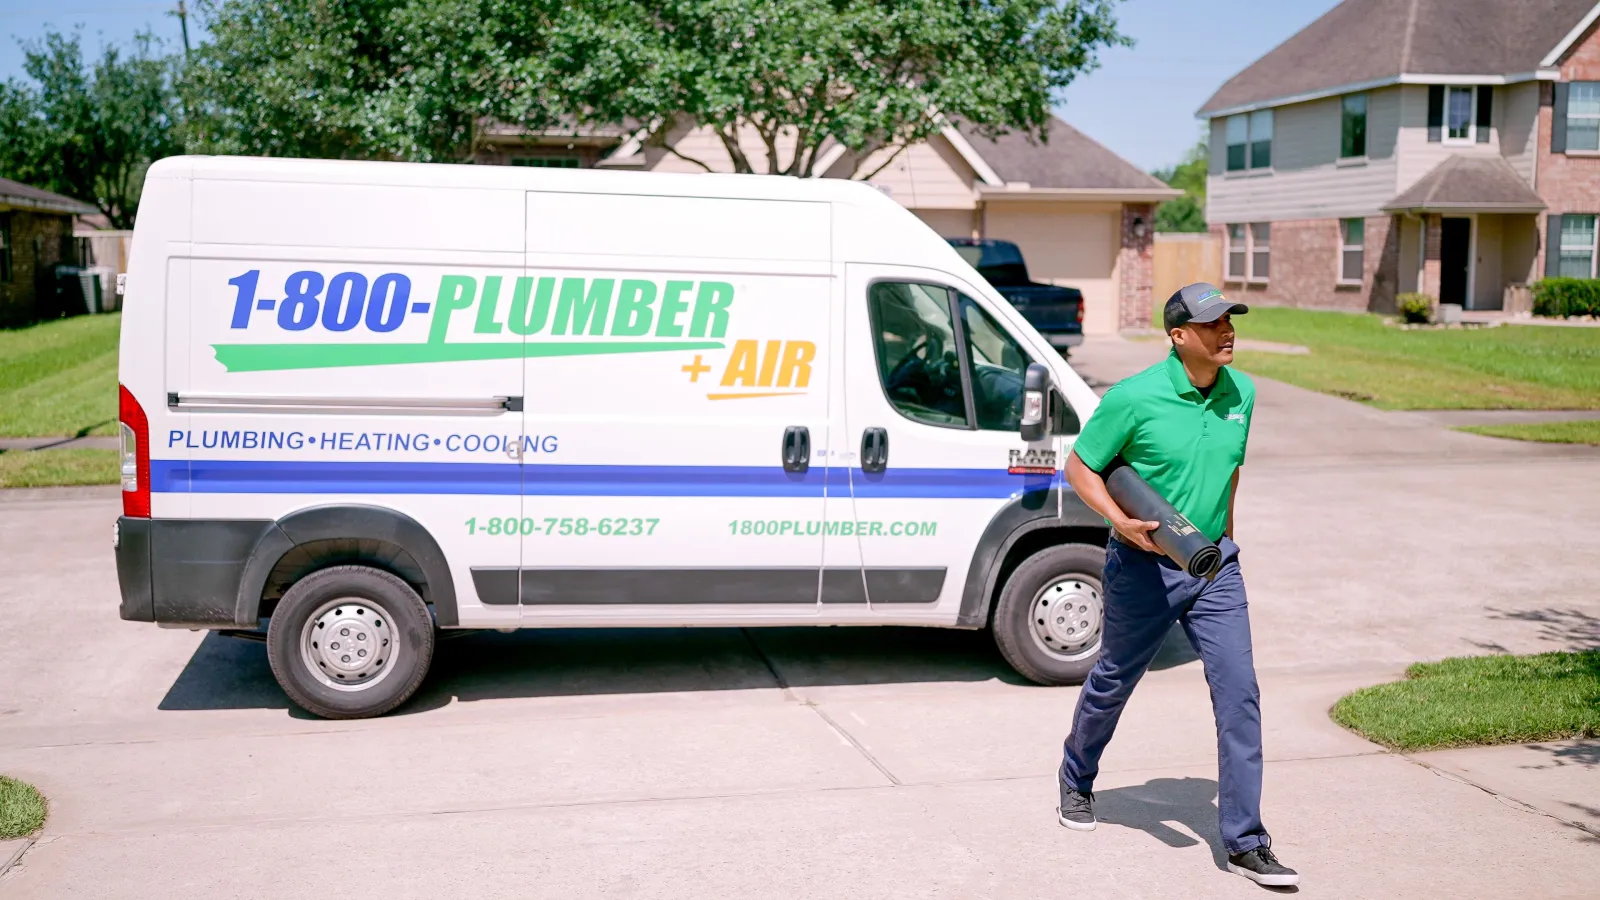 A Houston plumber enters a home